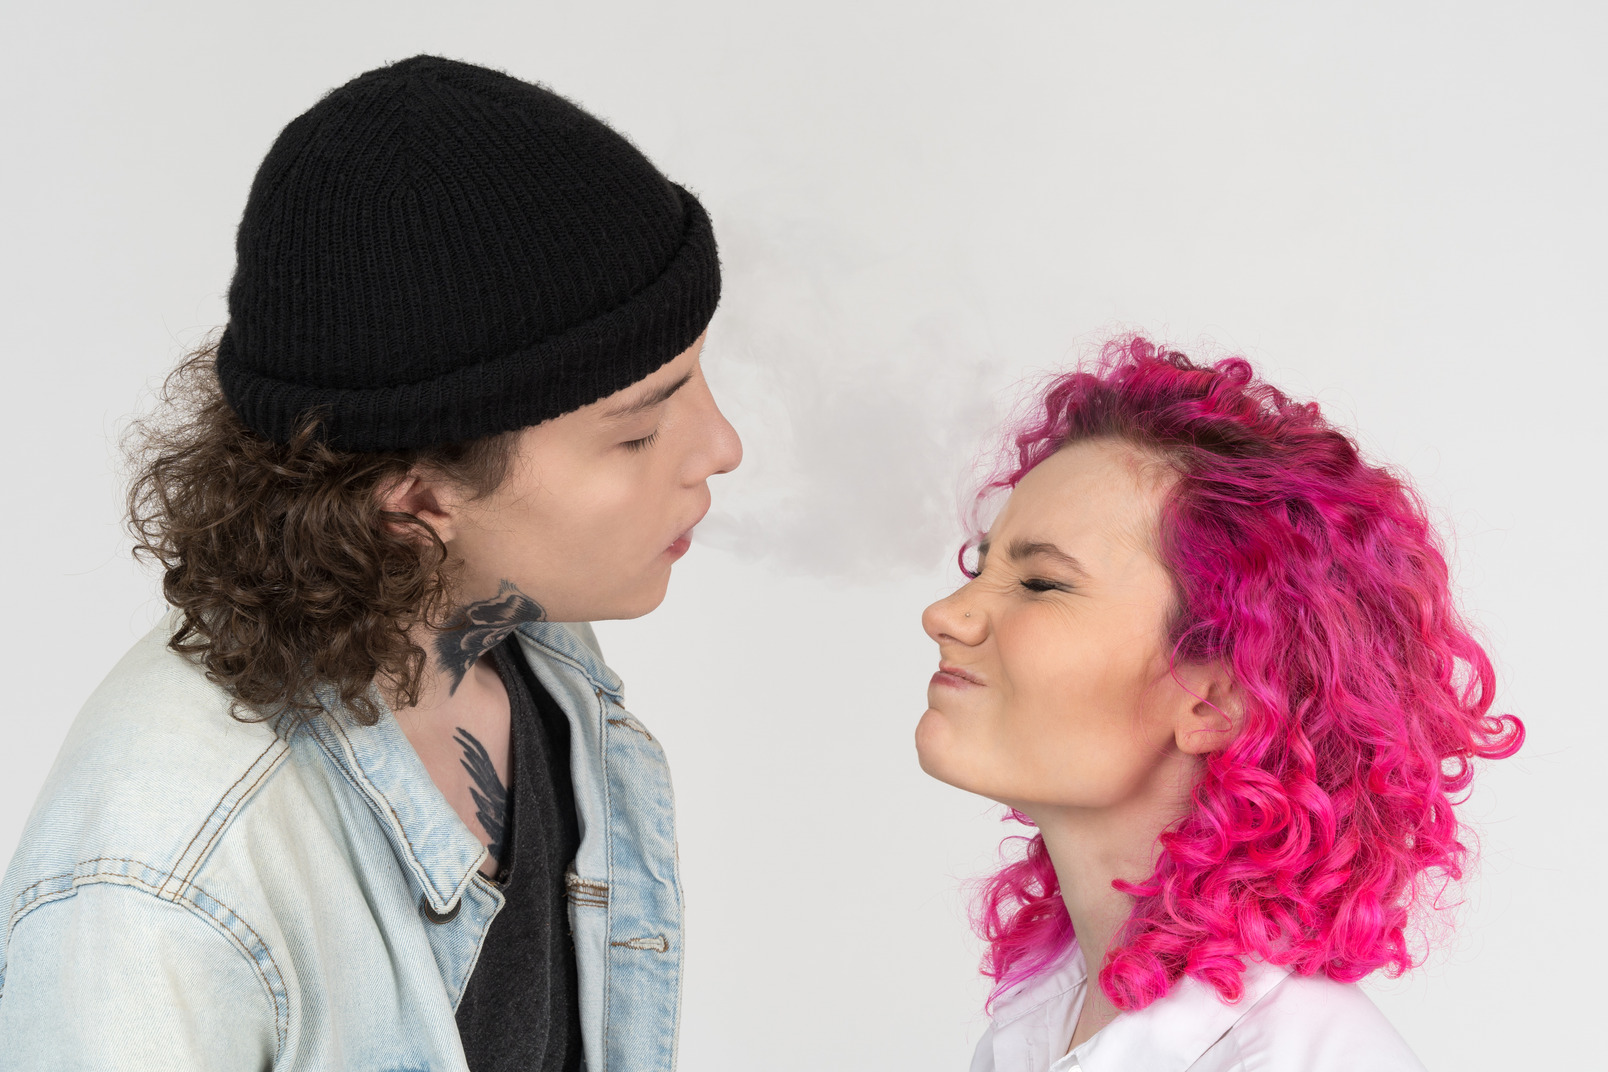 Male blowing smoke to his girlfriend's face